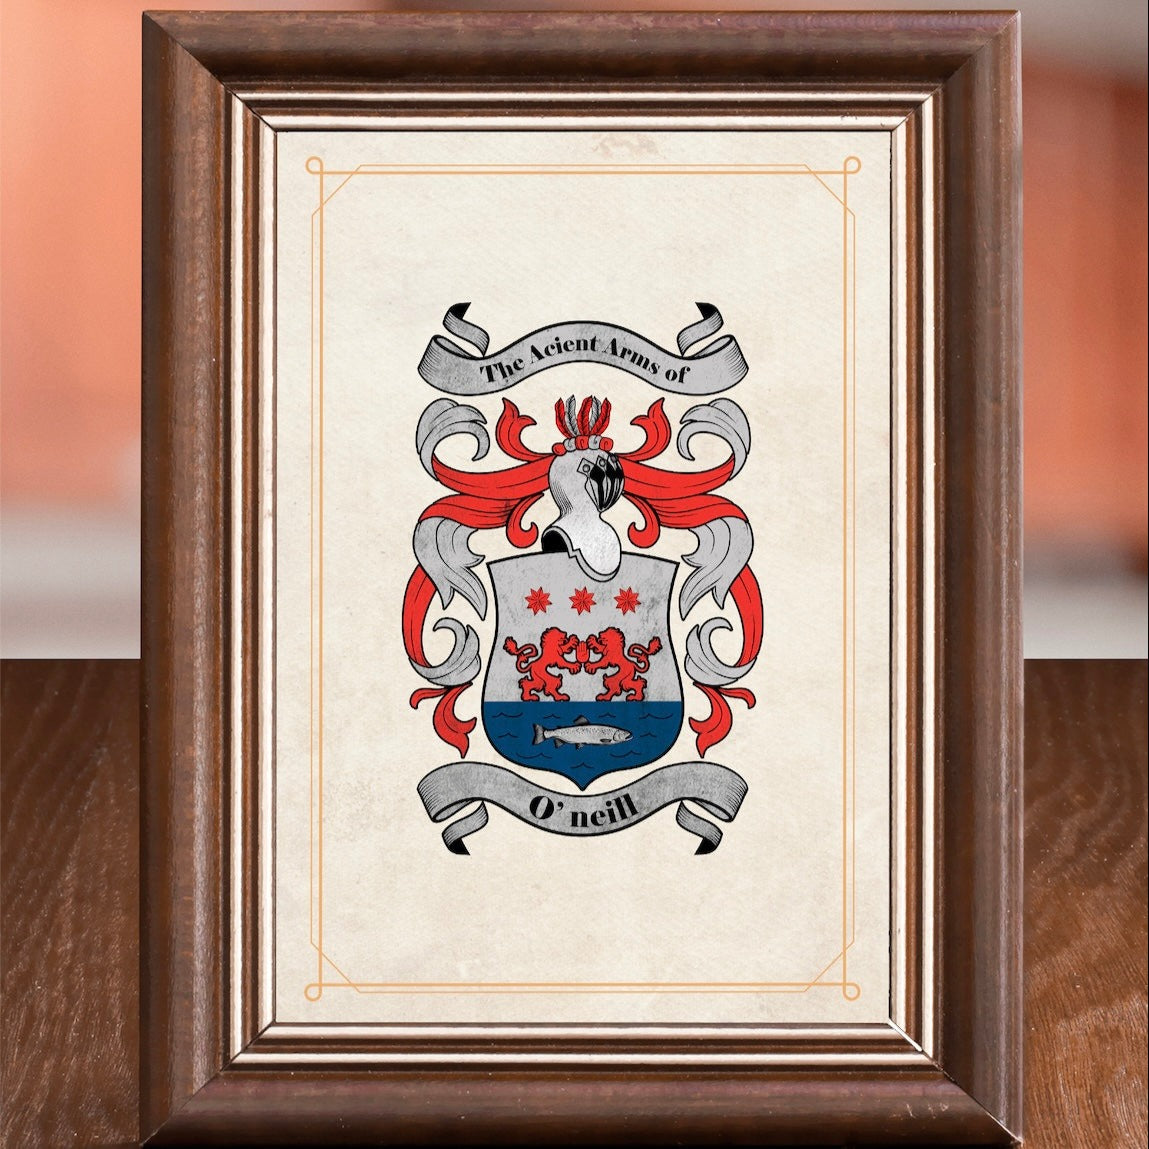 Research + Family Crest Print (Framed - Black wood)